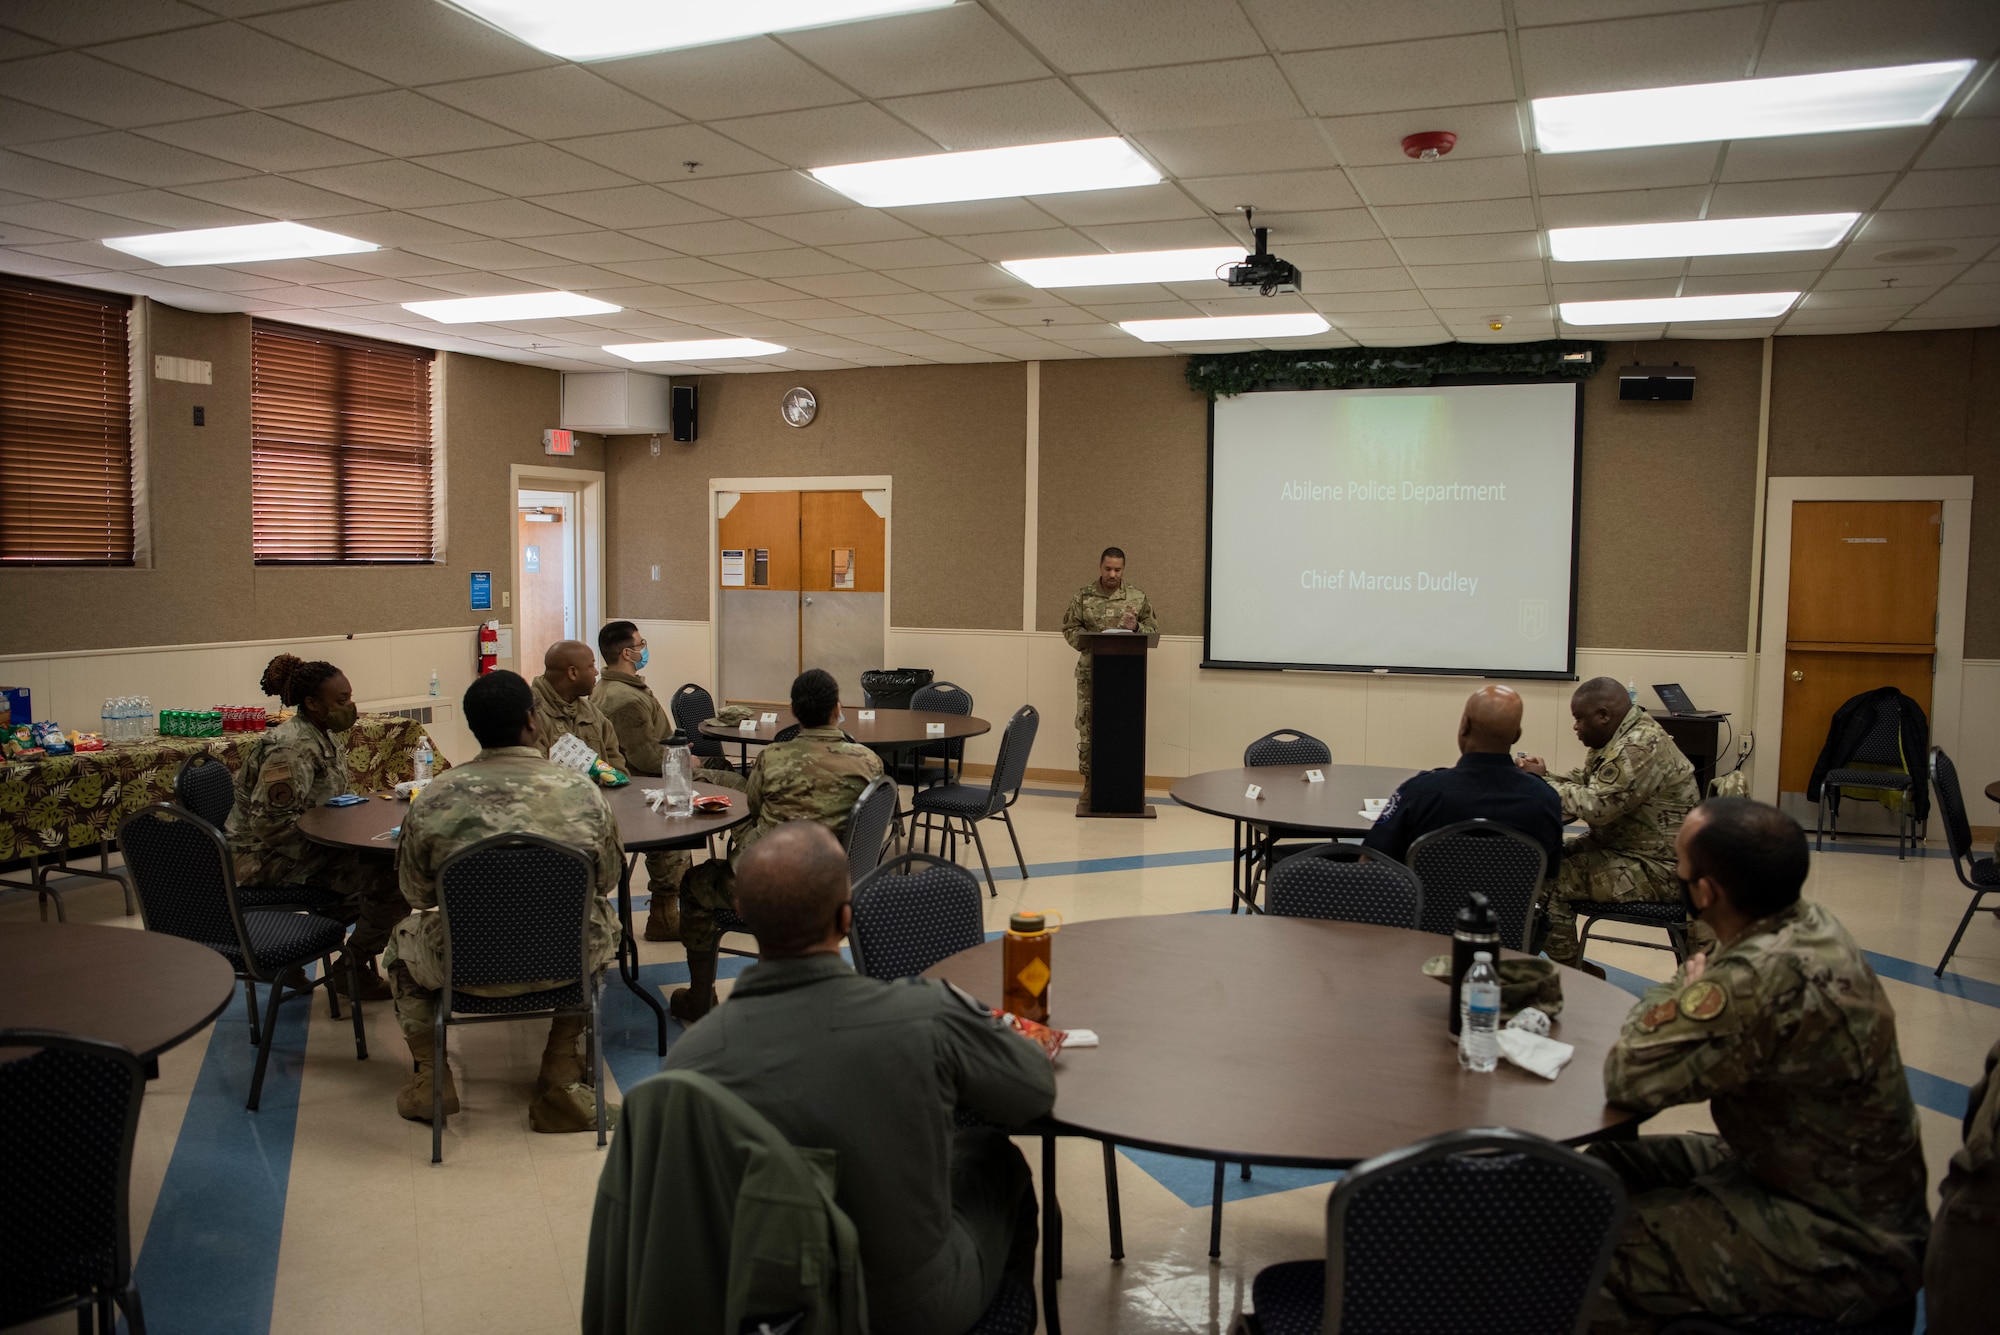 Members of Team Dyess and the Abilene community listen to a speech during a Black History Month luncheon at Dyess Air Force Base, Texas, Feb. 22, 2022. During the luncheon, Airmen and the Abilene Police Chief, Marcus Dudley, spoke about the importance of celebrating black history.  (U.S. Air Force photo by Airman 1st Class Ryan Hayman)